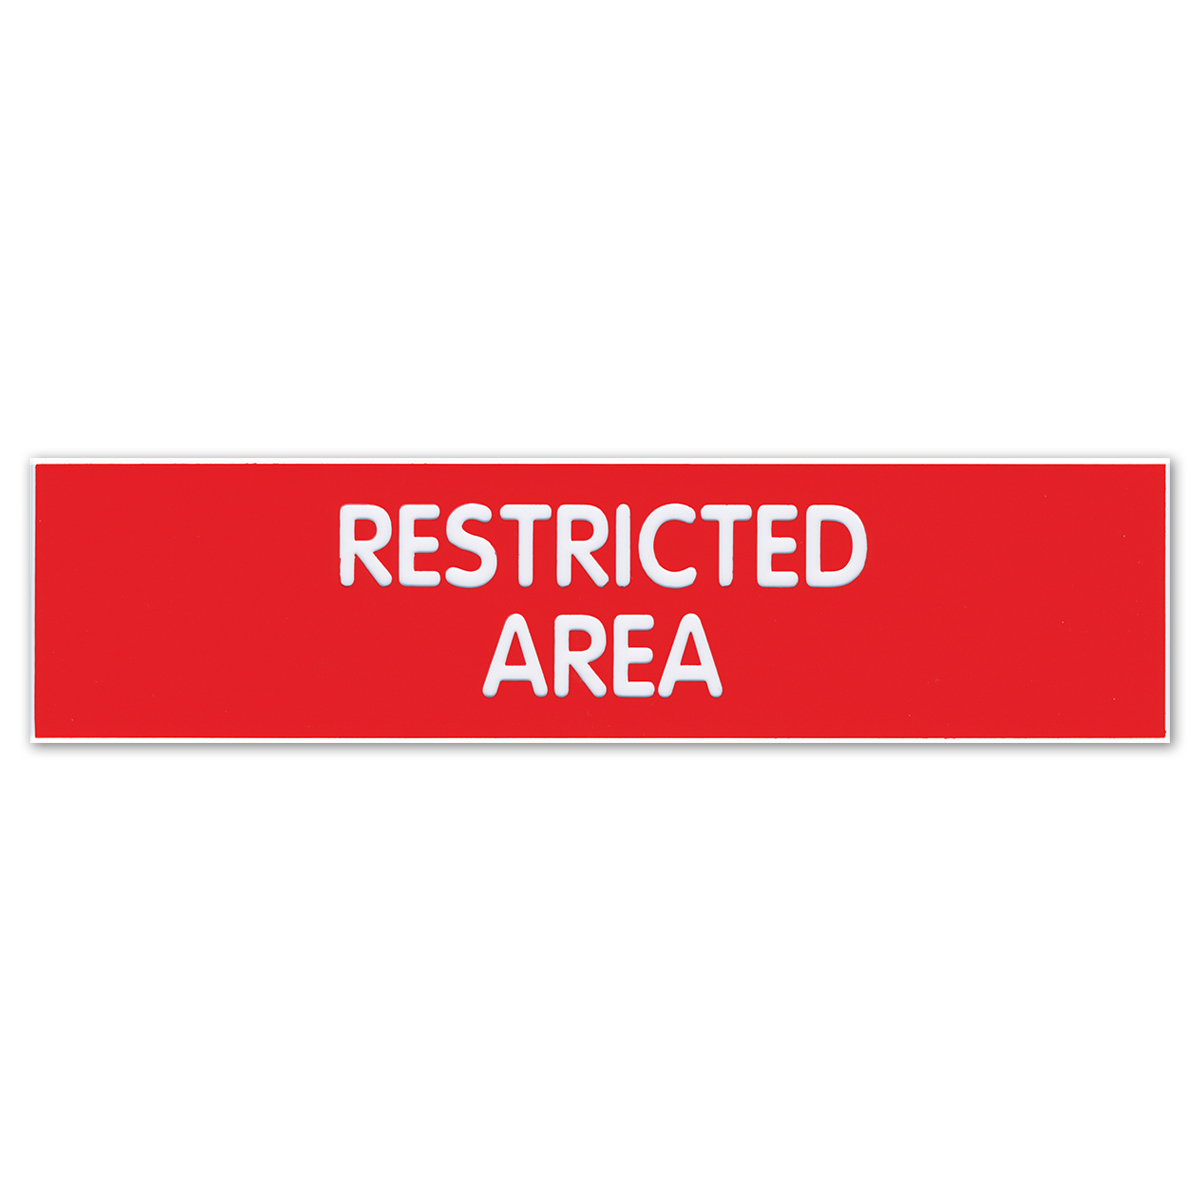 RESTRICTED AREA - Plastic Sign - 098005